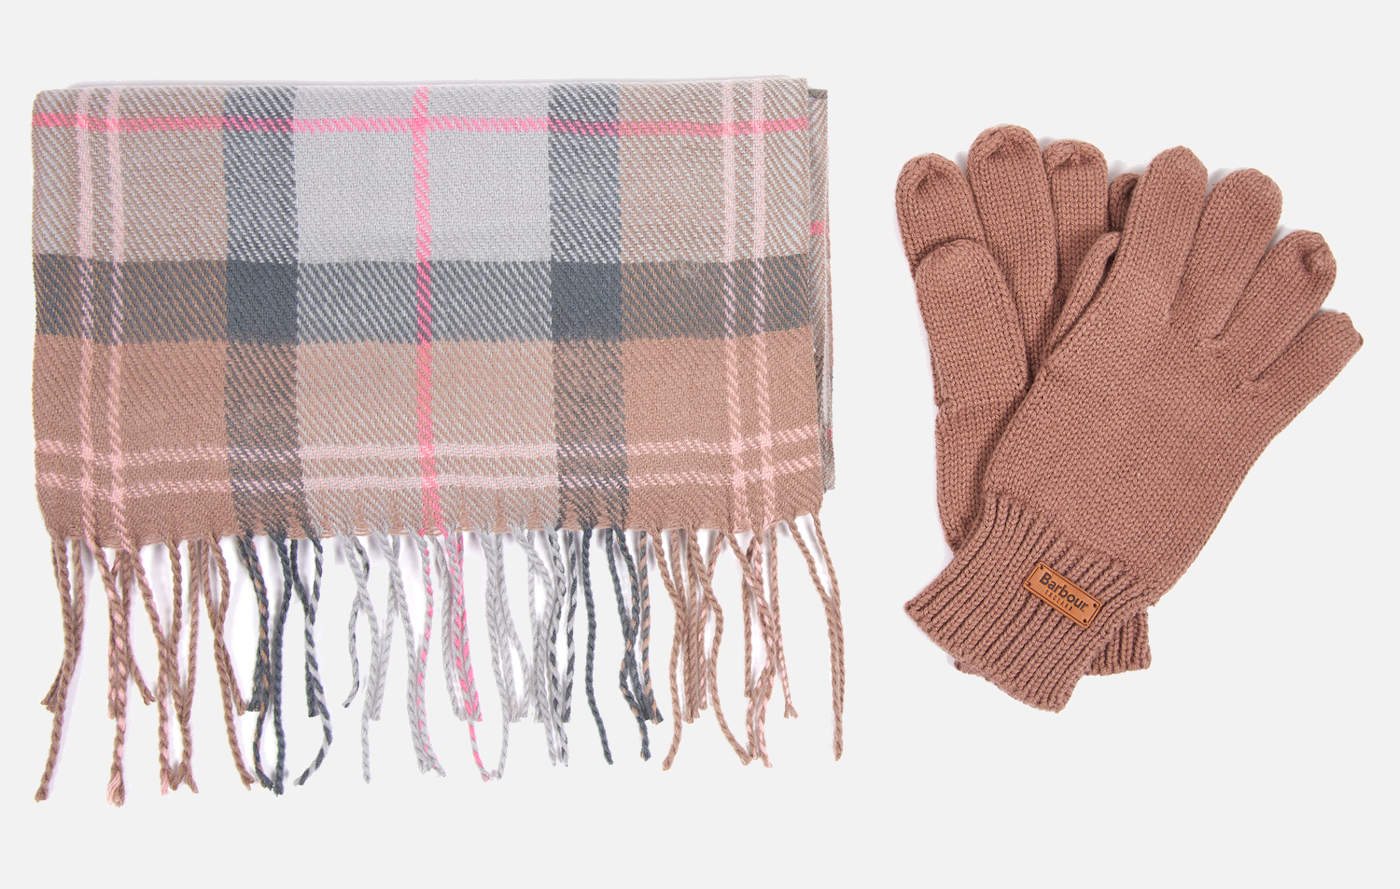 ladies barbour gloves and scarf set